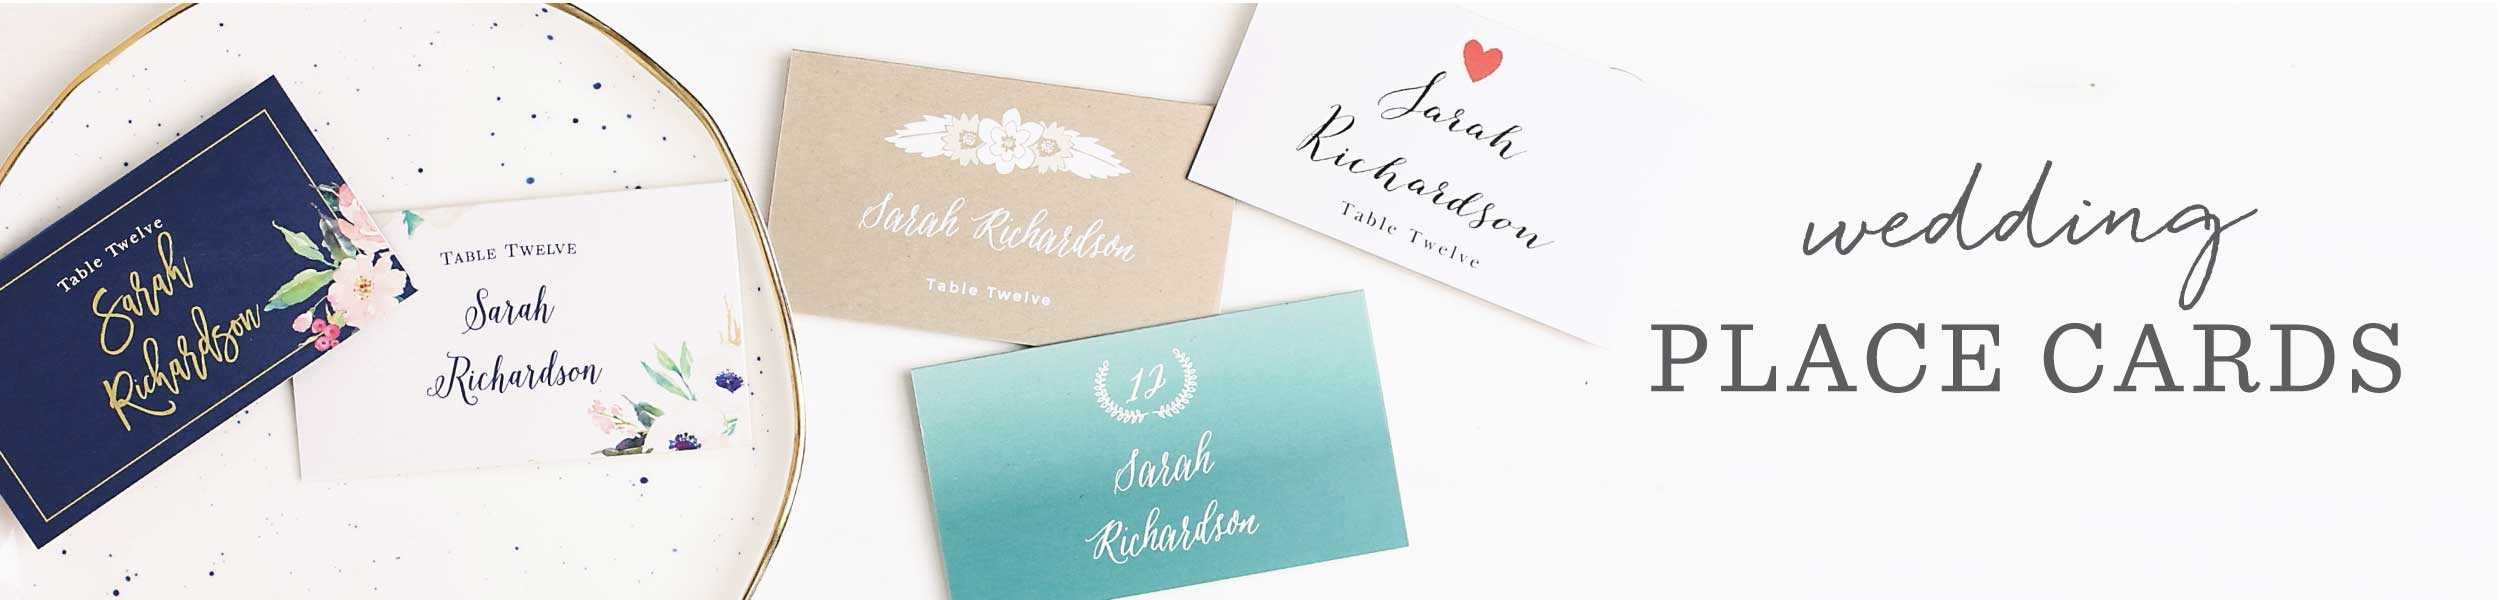 034 Wedding Place Cards Name Template Marvelous Ideas Throughout Place Card Setting Template